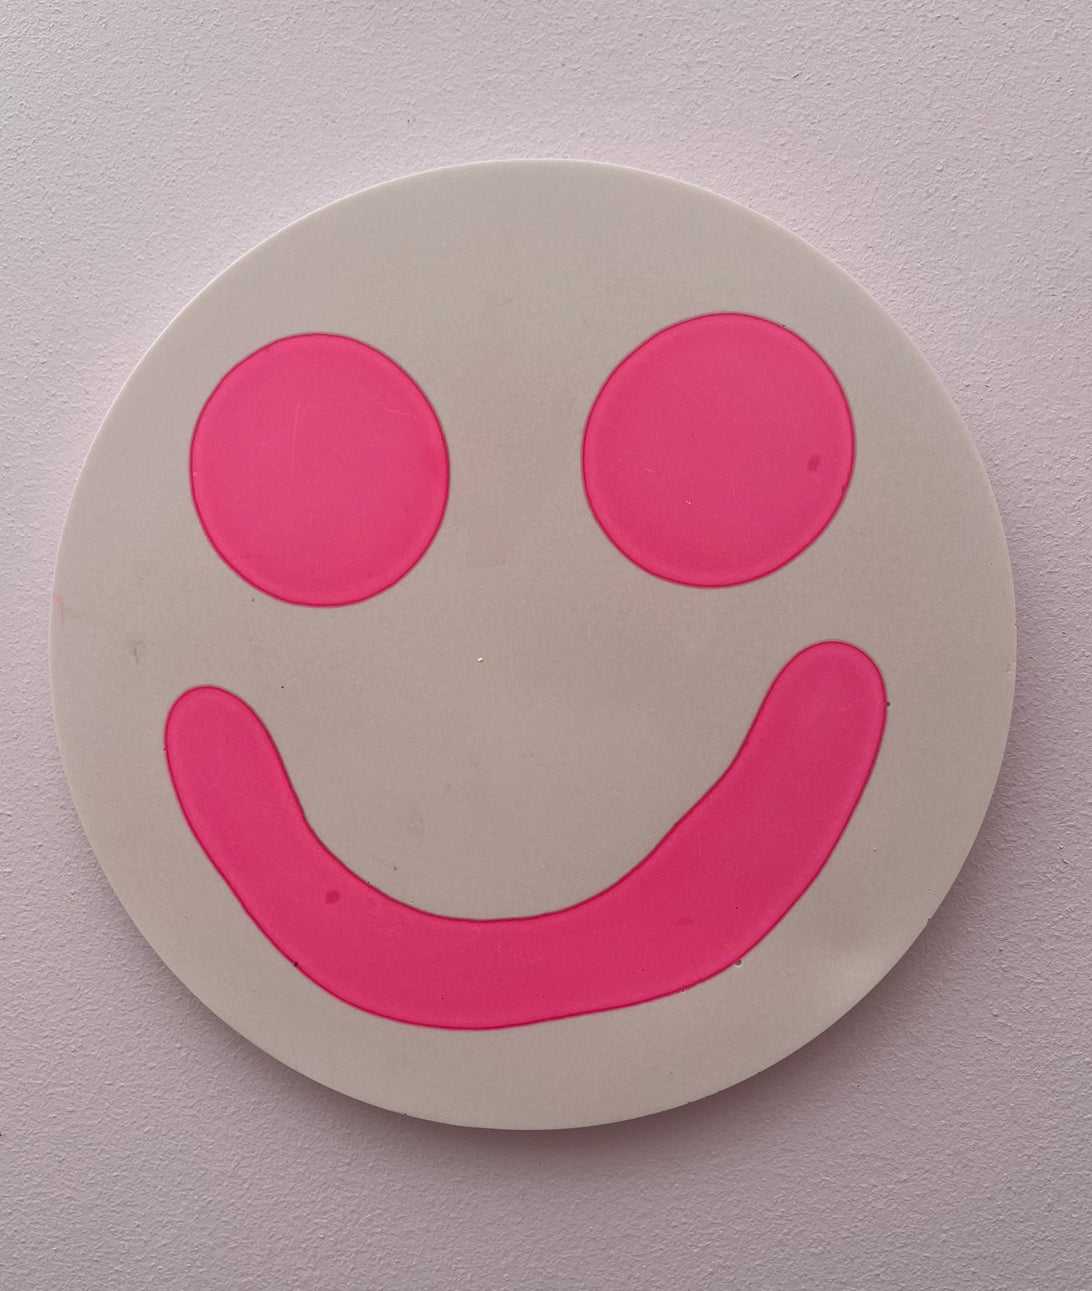 Smiley Wall Hanging - Pale Pink - READY TO SHIP